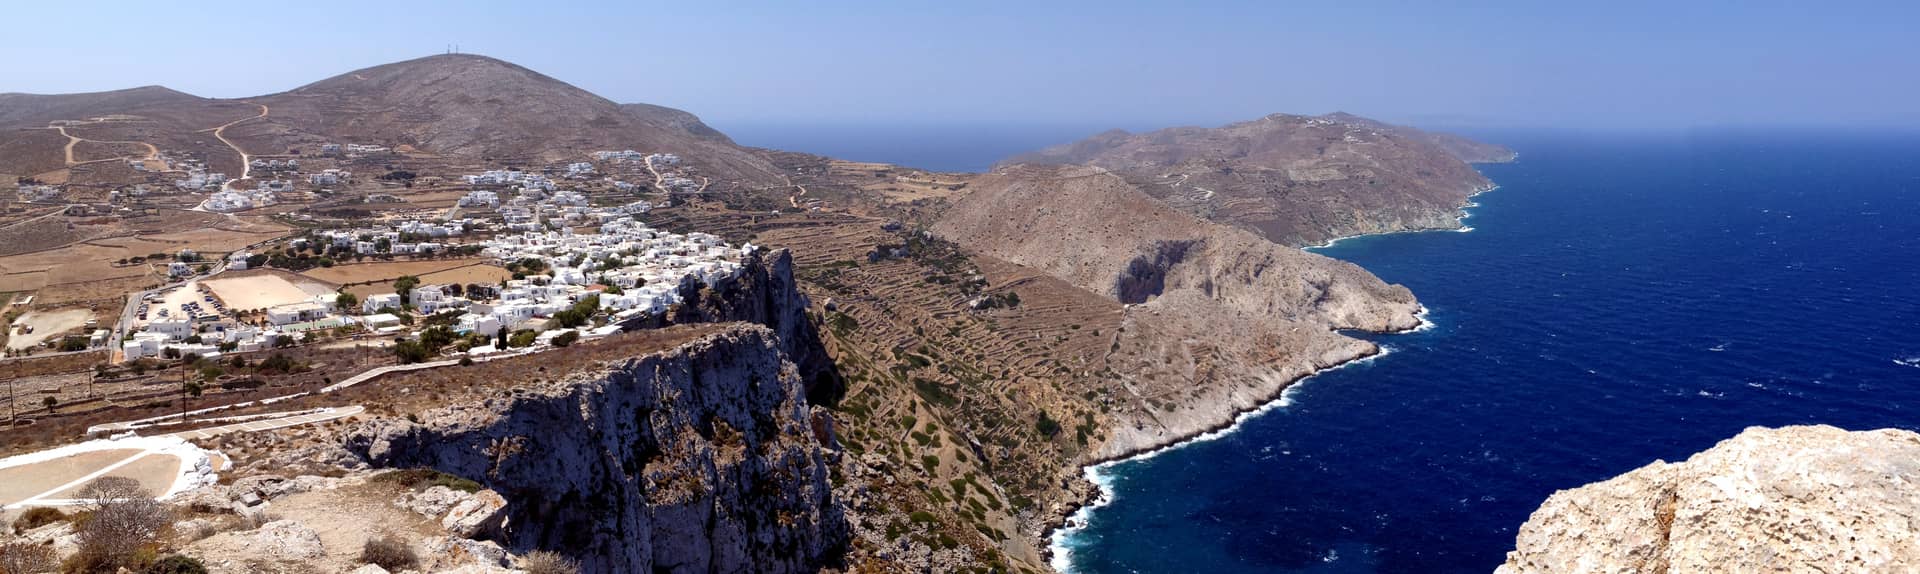 Folegandros island sailing holidays, Sikinos guide and yacht charters.